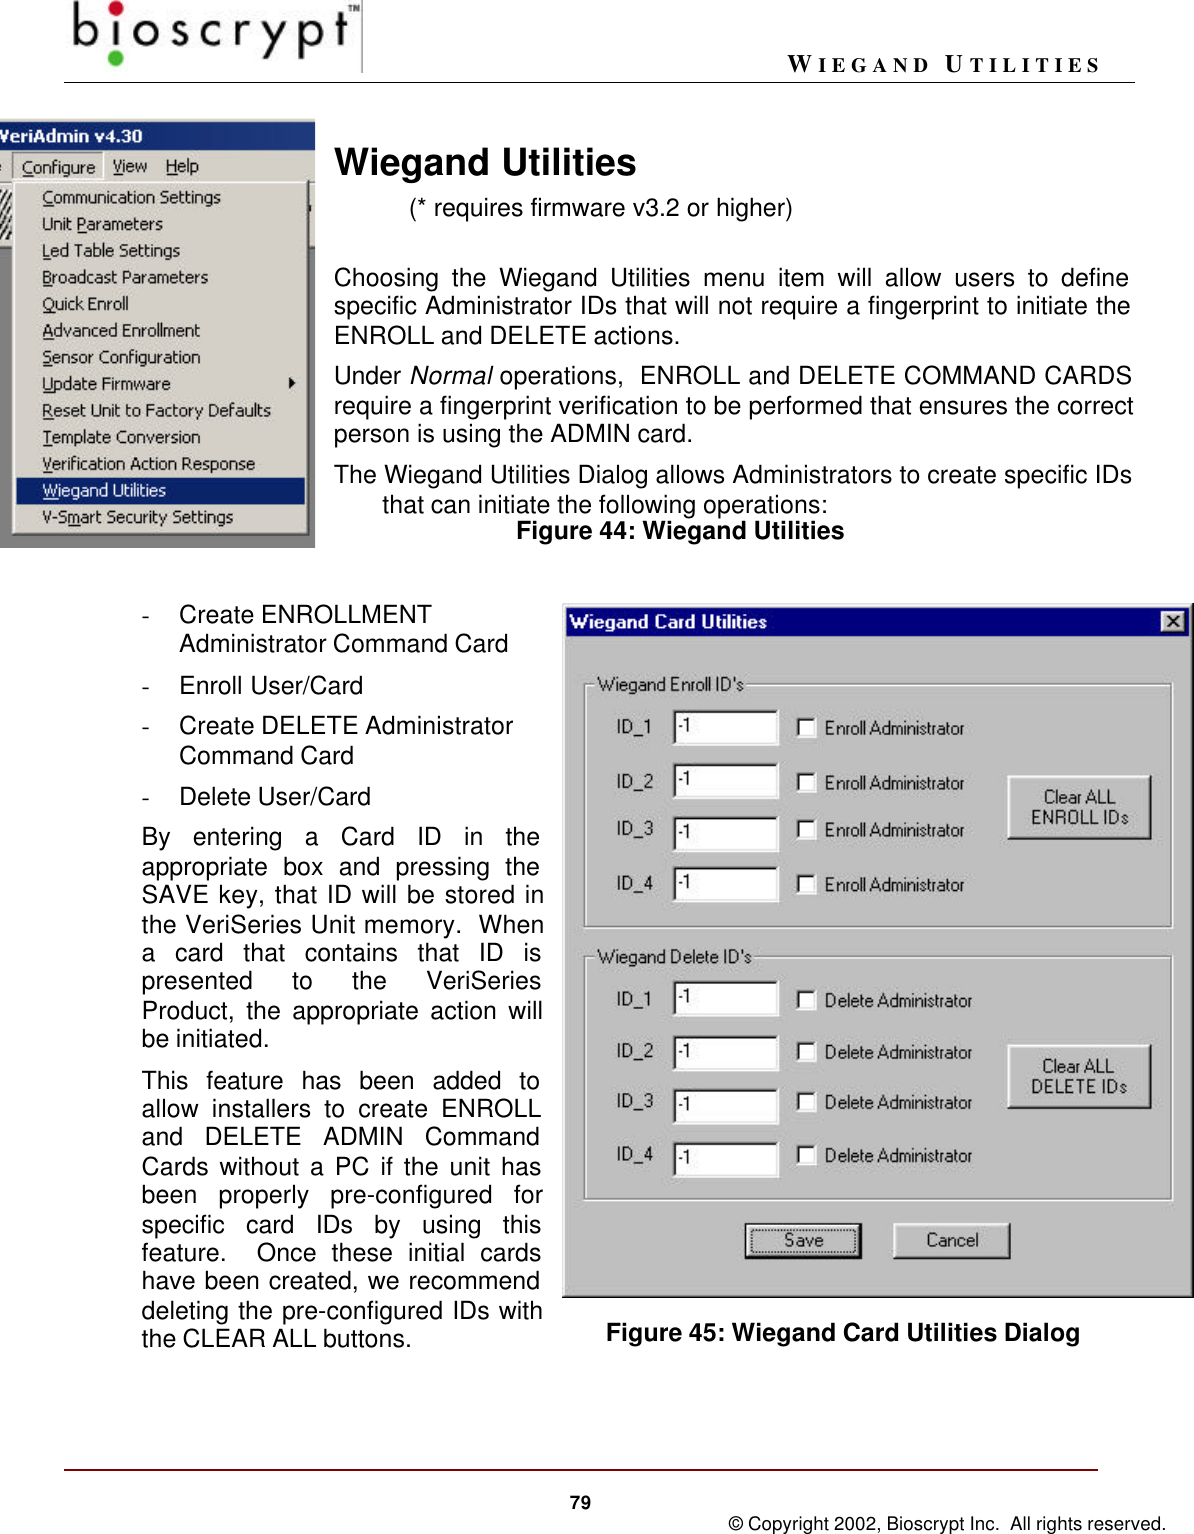 WIEGAND UTILITIES79 © Copyright 2002, Bioscrypt Inc.  All rights reserved.Figure 45: Wiegand Card Utilities DialogWiegand Utilities(* requires firmware v3.2 or higher)Choosing the Wiegand Utilities menu item will allow users to definespecific Administrator IDs that will not require a fingerprint to initiate theENROLL and DELETE actions.Under Normal operations,  ENROLL and DELETE COMMAND CARDSrequire a fingerprint verification to be performed that ensures the correctperson is using the ADMIN card.The Wiegand Utilities Dialog allows Administrators to create specific IDsthat can initiate the following operations:      Figure 44: Wiegand Utilities- Create ENROLLMENTAdministrator Command Card- Enroll User/Card- Create DELETE AdministratorCommand Card- Delete User/CardBy entering a Card ID in theappropriate box and pressing theSAVE key, that ID will be stored inthe VeriSeries Unit memory.  Whena card that contains that ID ispresented to the VeriSeriesProduct, the appropriate action willbe initiated.This feature has been added toallow installers to create ENROLLand DELETE ADMIN CommandCards without a PC if the unit hasbeen properly pre-configured forspecific card IDs by using thisfeature.  Once these initial cardshave been created, we recommenddeleting the pre-configured IDs withthe CLEAR ALL buttons.